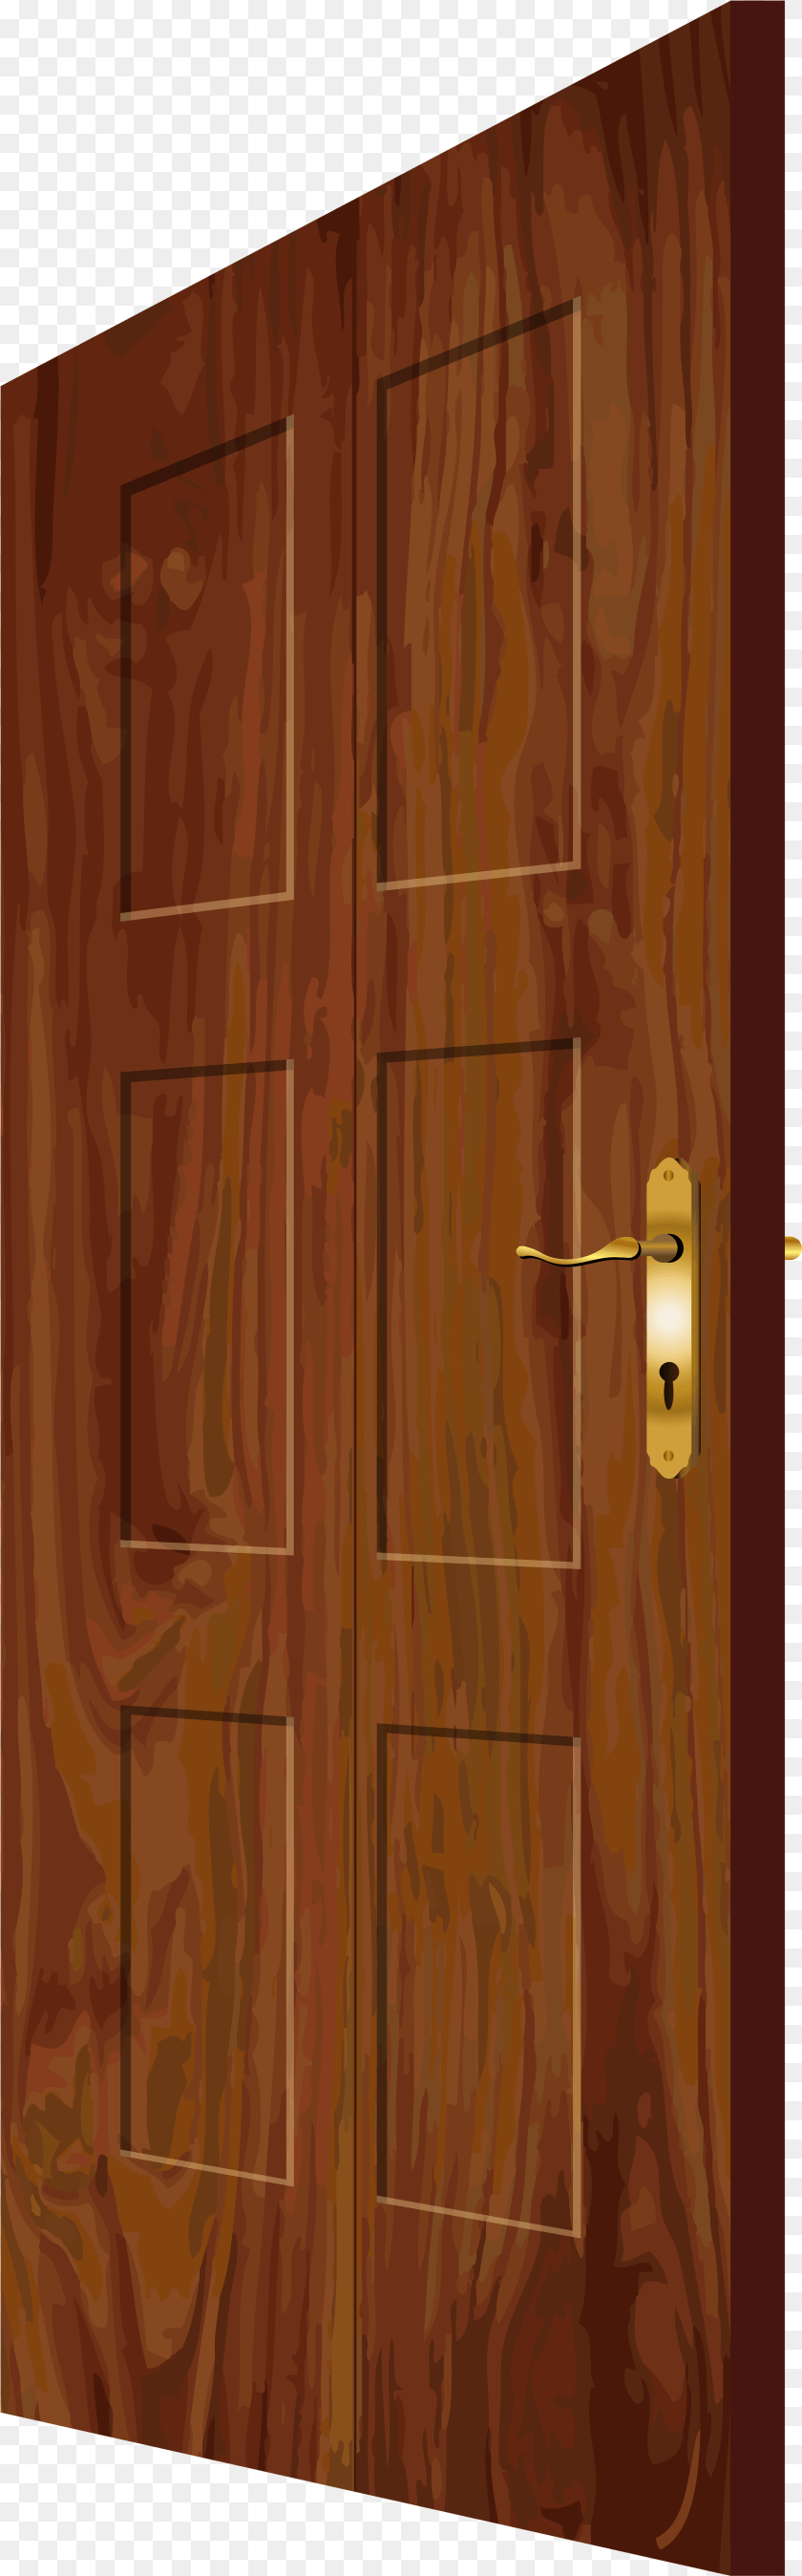 2461x7901 Wooden Doortitle Wooden Door Wooden Door Clipart, Wood, Hardwood, Stained Wood, Furniture Sticker PNG